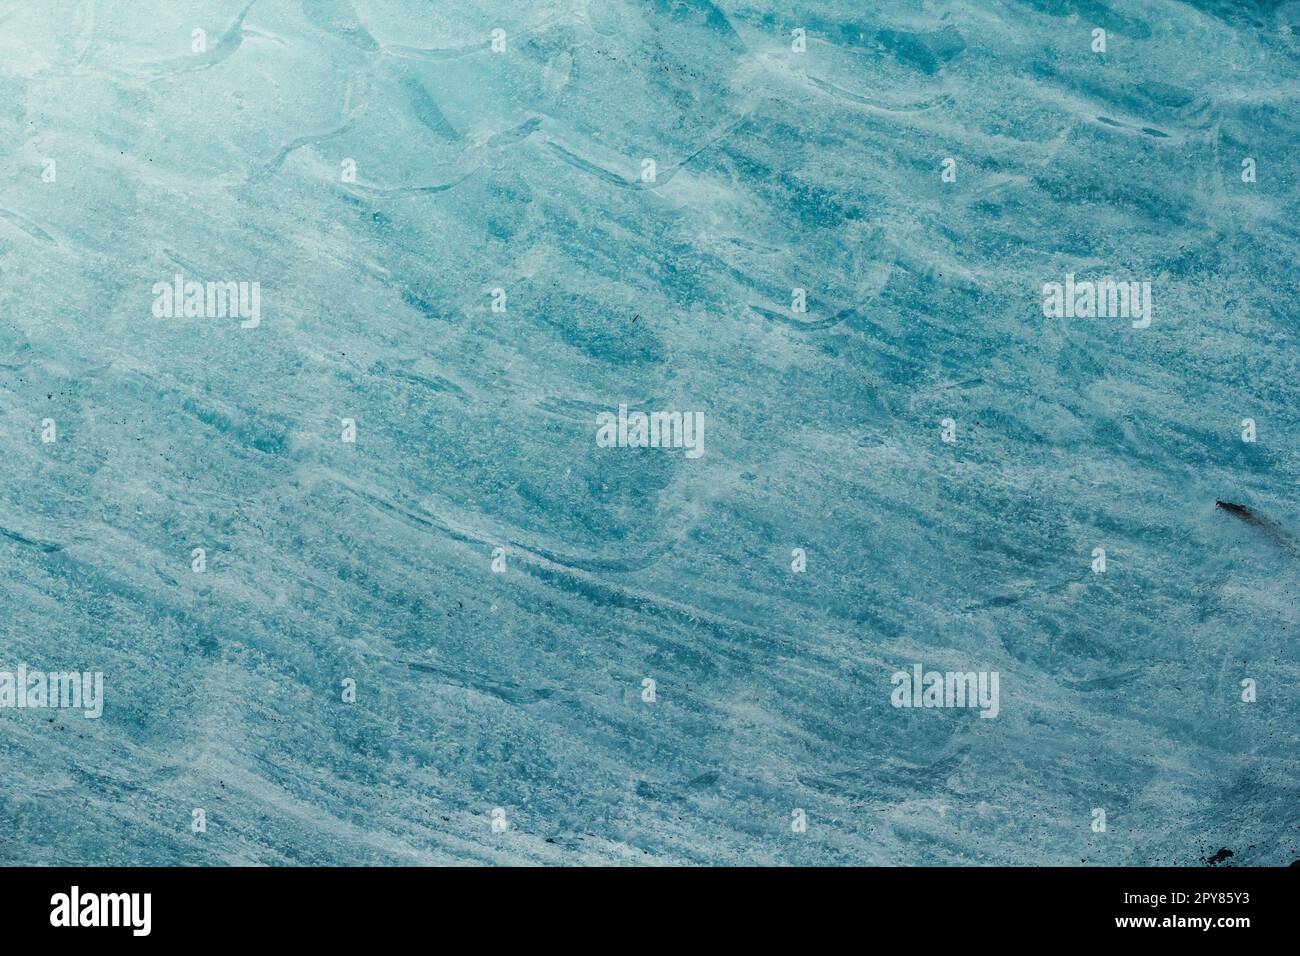 Close up blue wavy ice surface concept photo Stock Photo